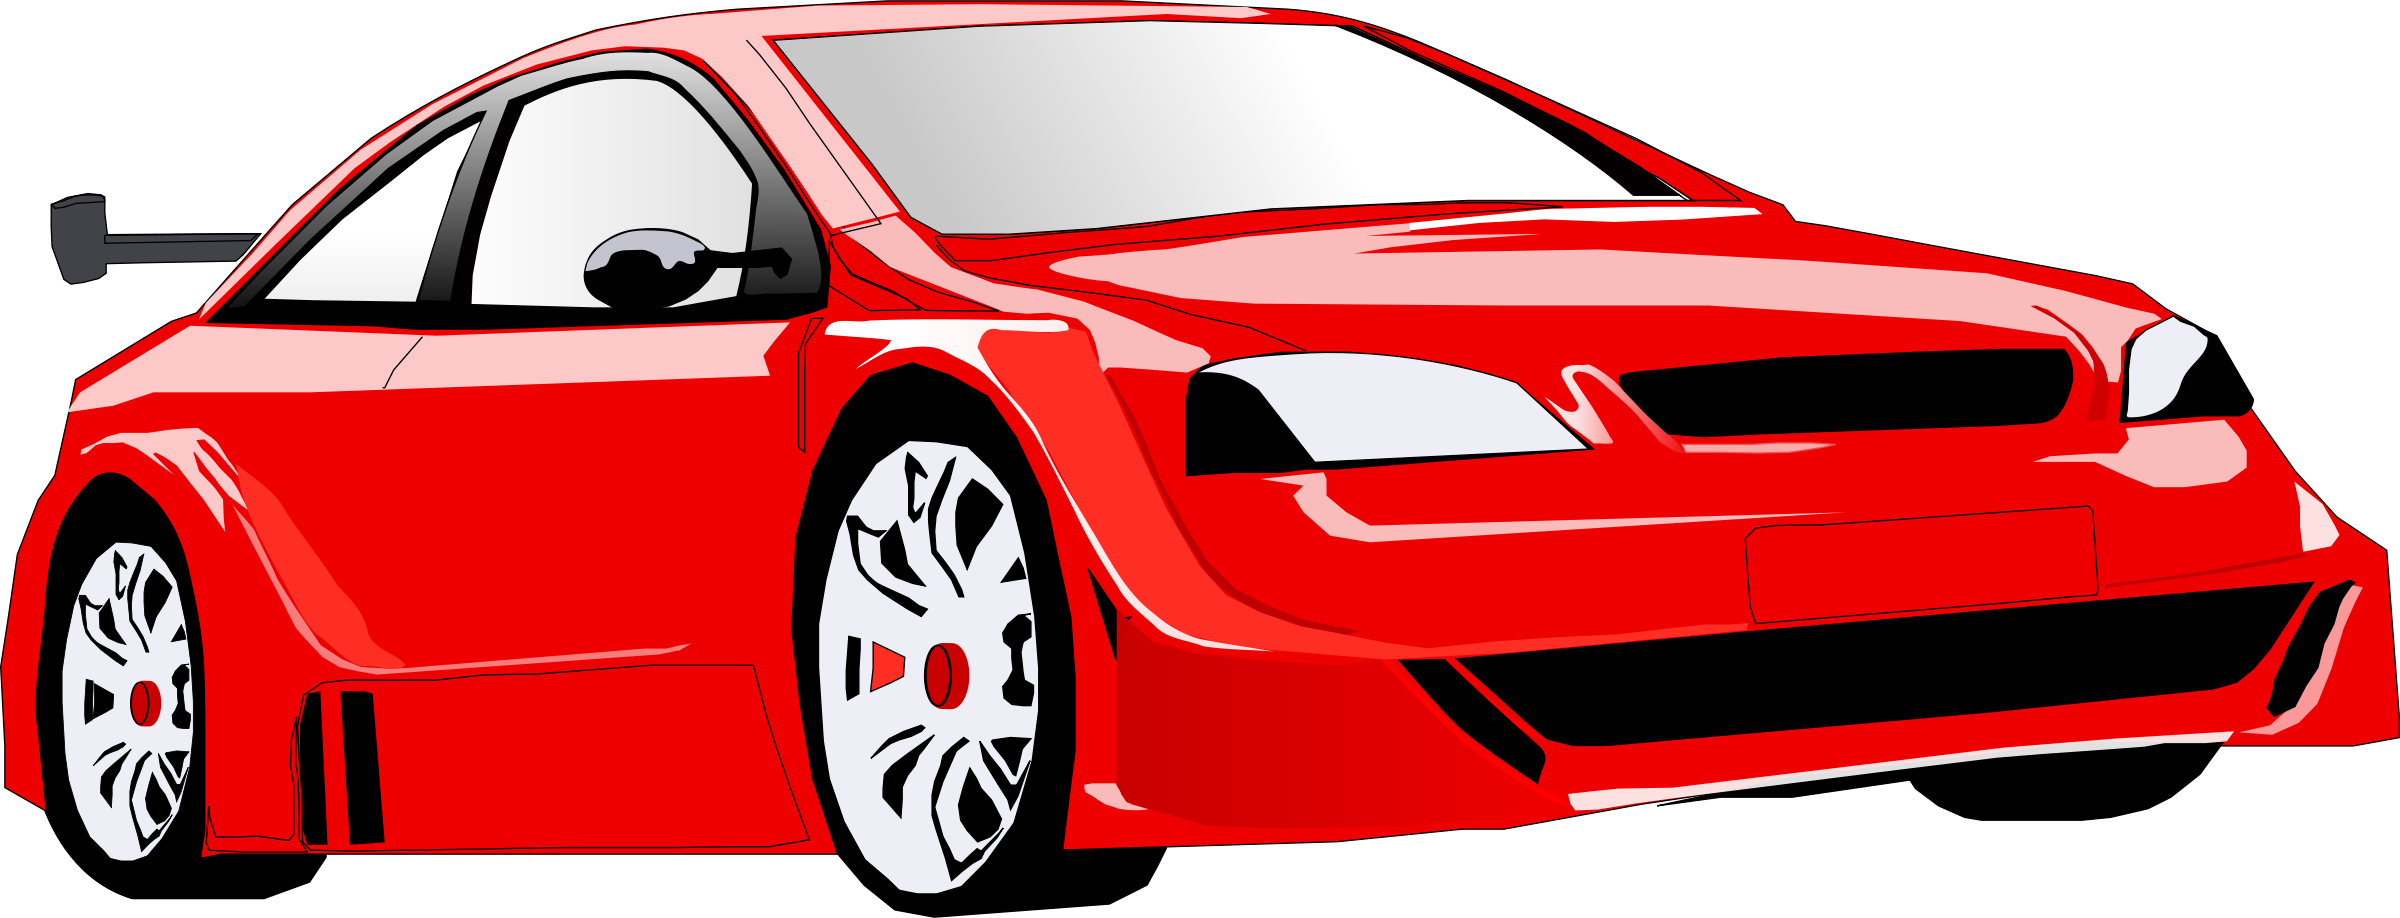 Sports Car Clipart Background 1 HD Wallpapers | amagico.